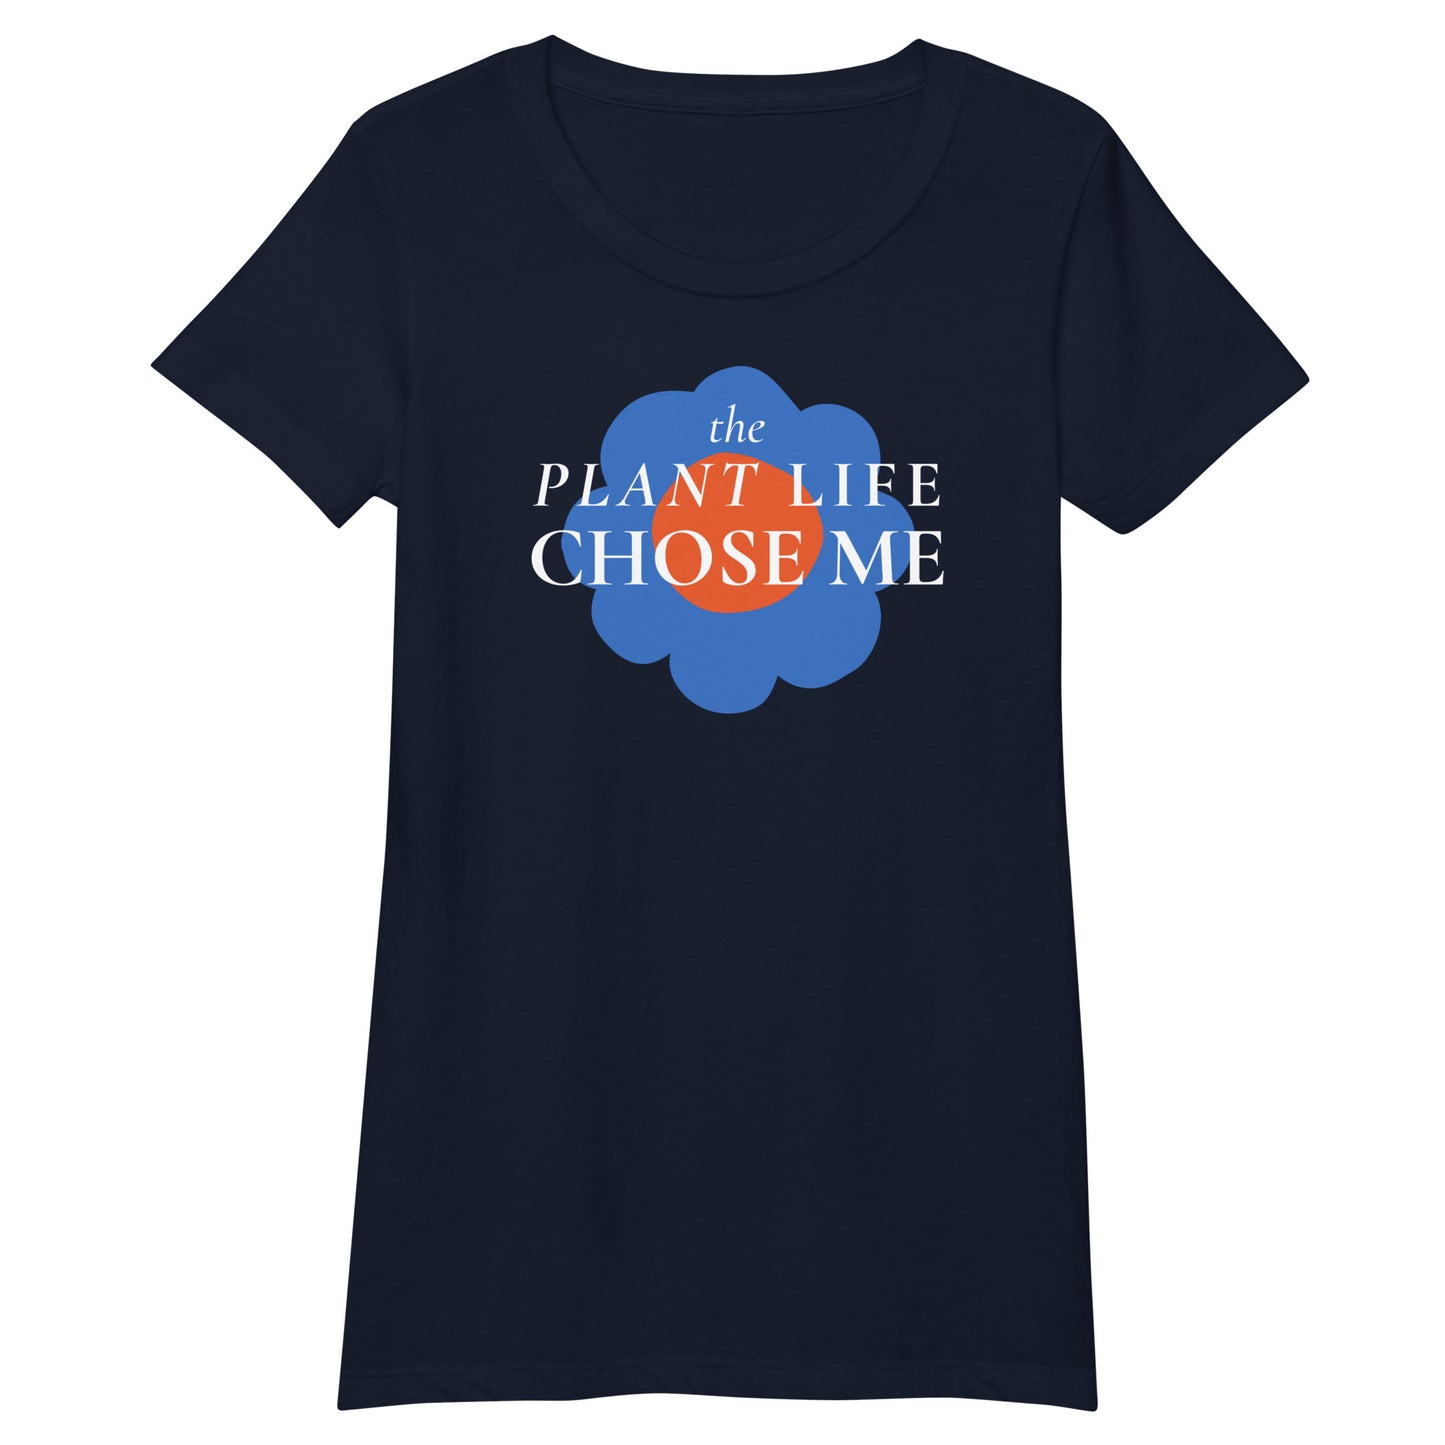 The Plant Life Chose Me Navy Blue Fitted T-Shirt